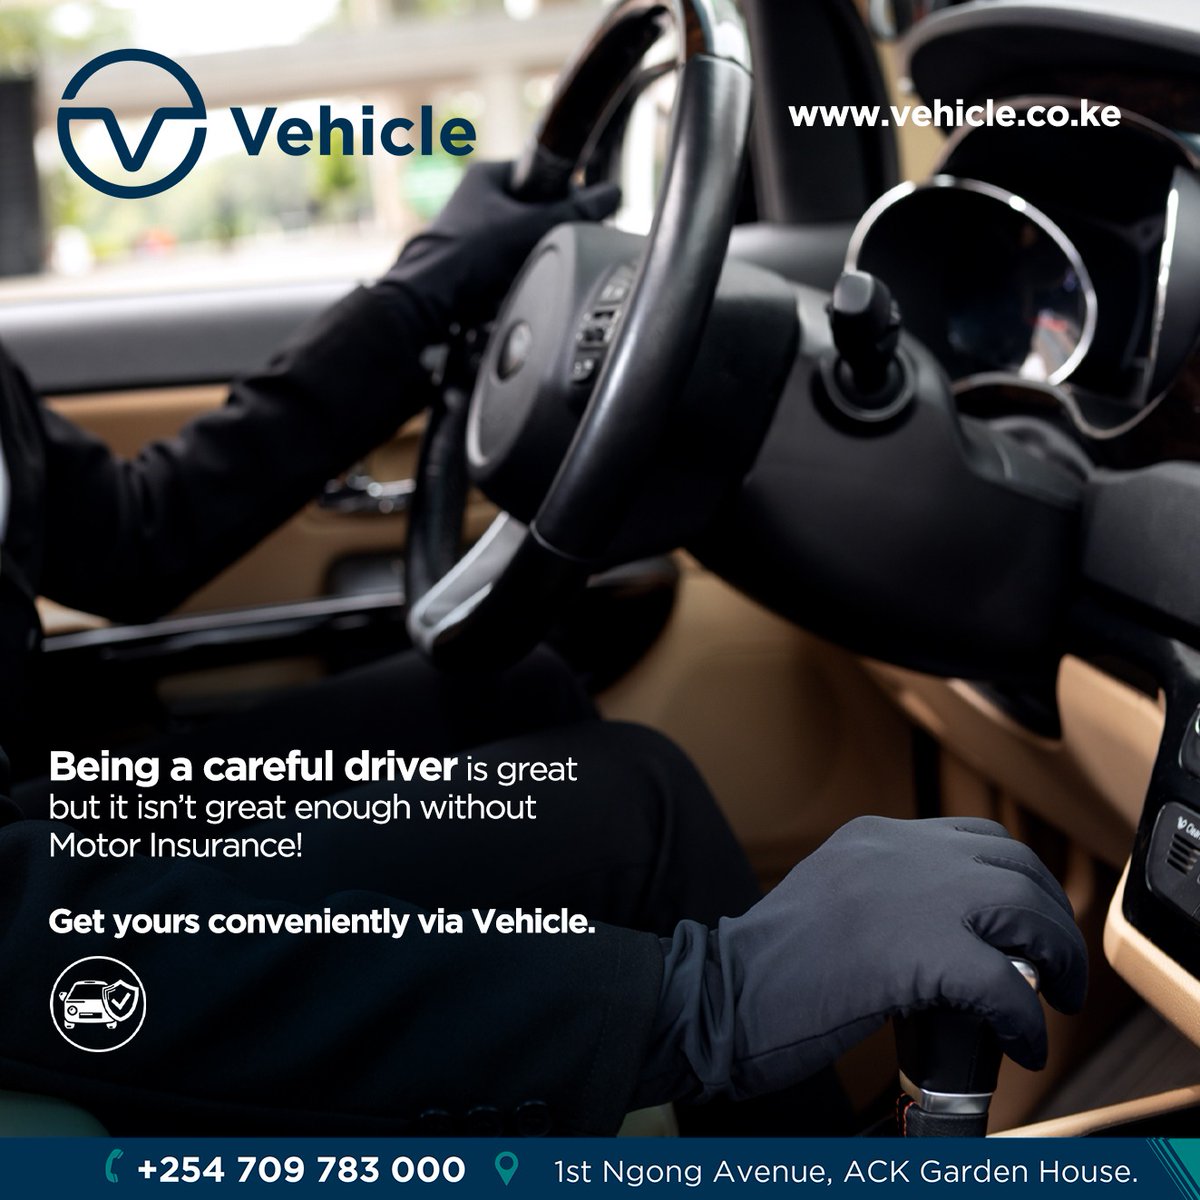 Be that best driver you have always wanted to be on the road with Motor Insurance!

Get one conveniently via vehicle.co.ke and many options available for you.    

#vehicleinsurance #WednesdayThoughts #RevvedUp #ComprehensiveInsurance #RoadRage